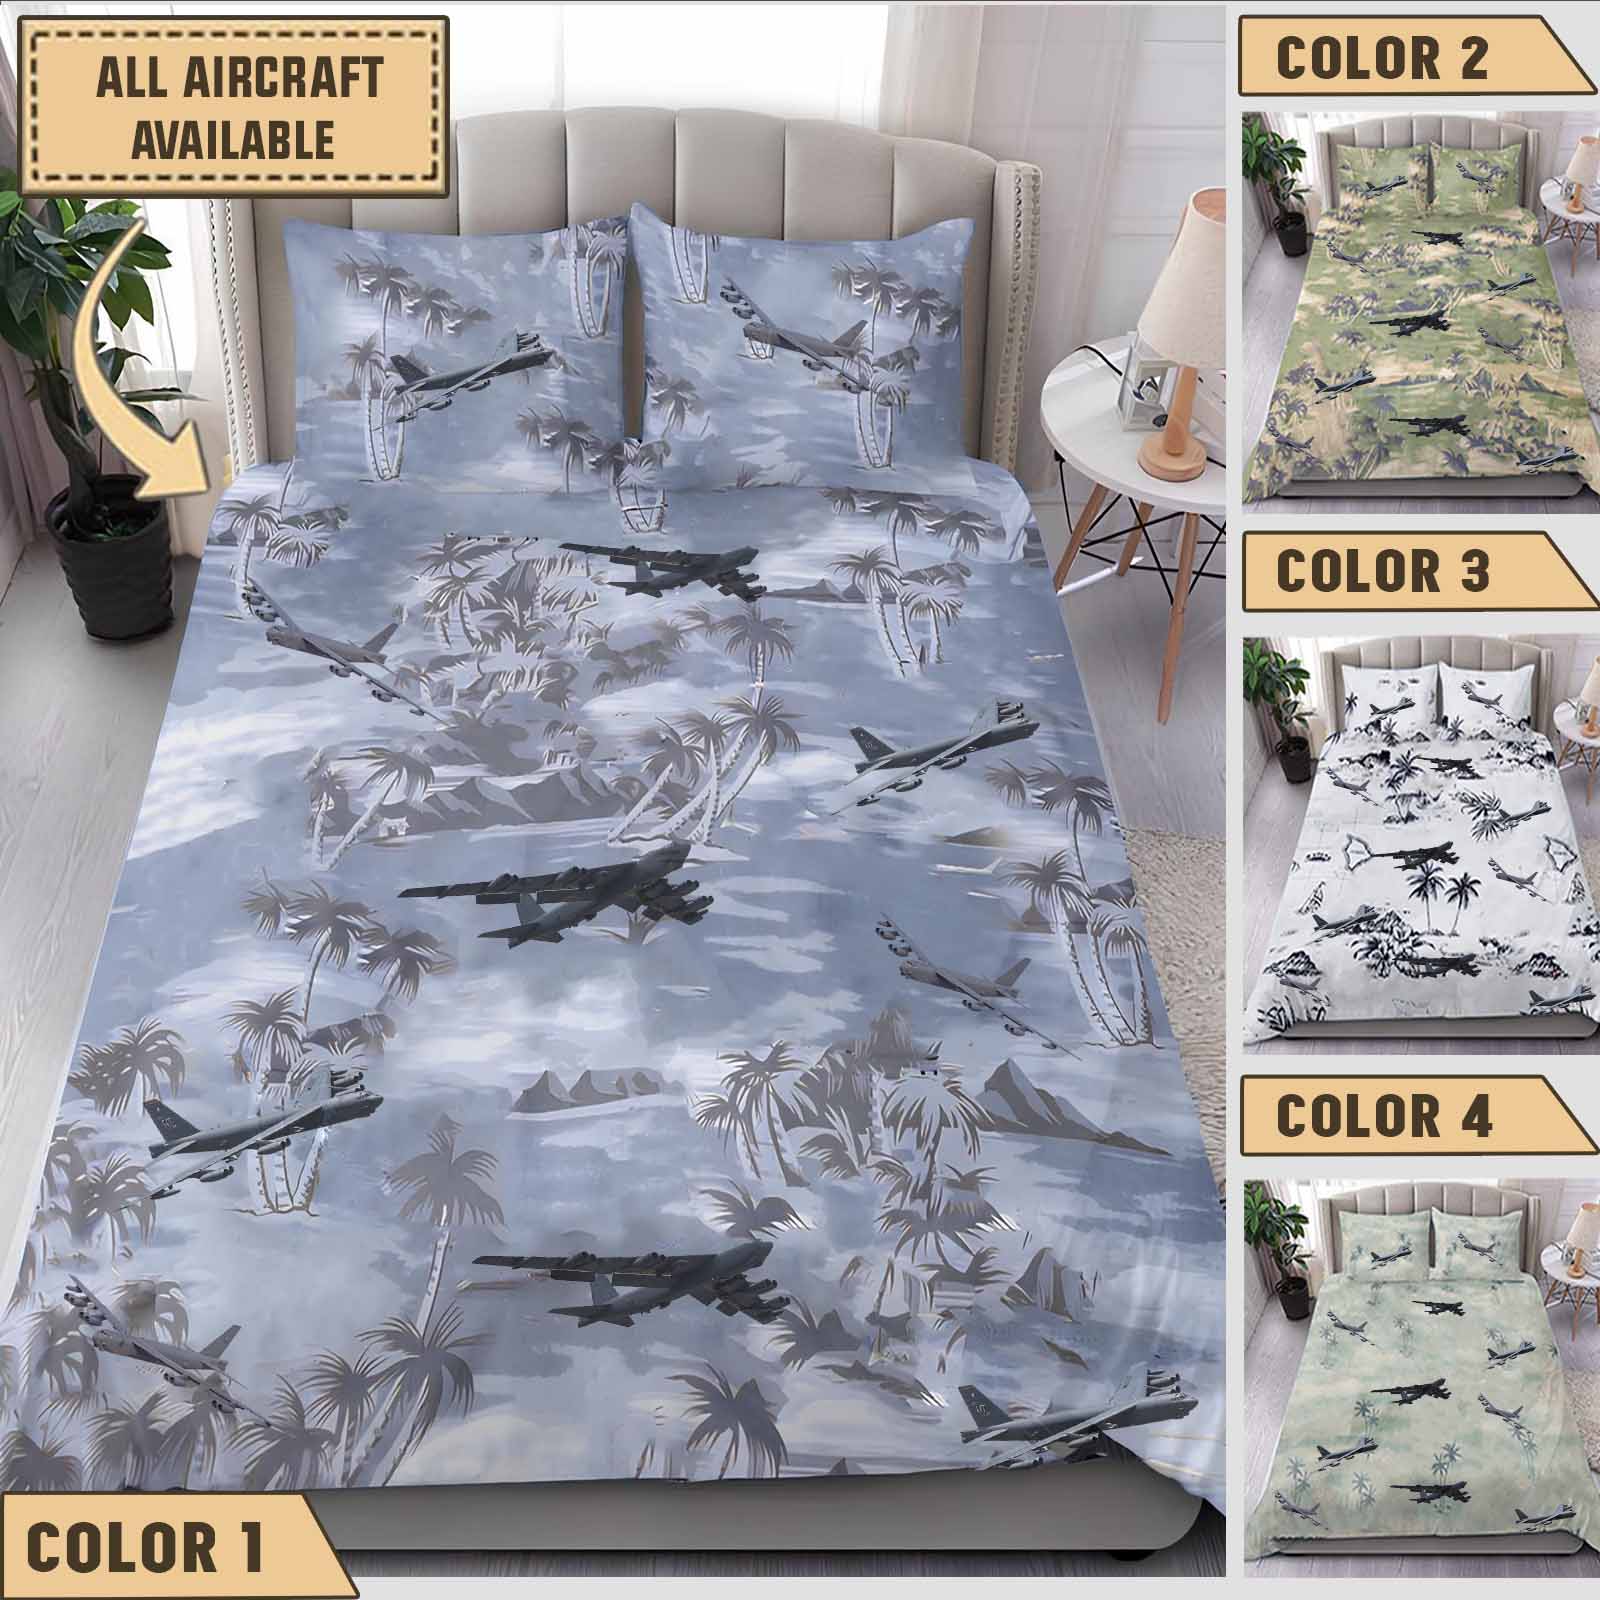 b 52 stratofortress b52aircraft bedding collection ibml8